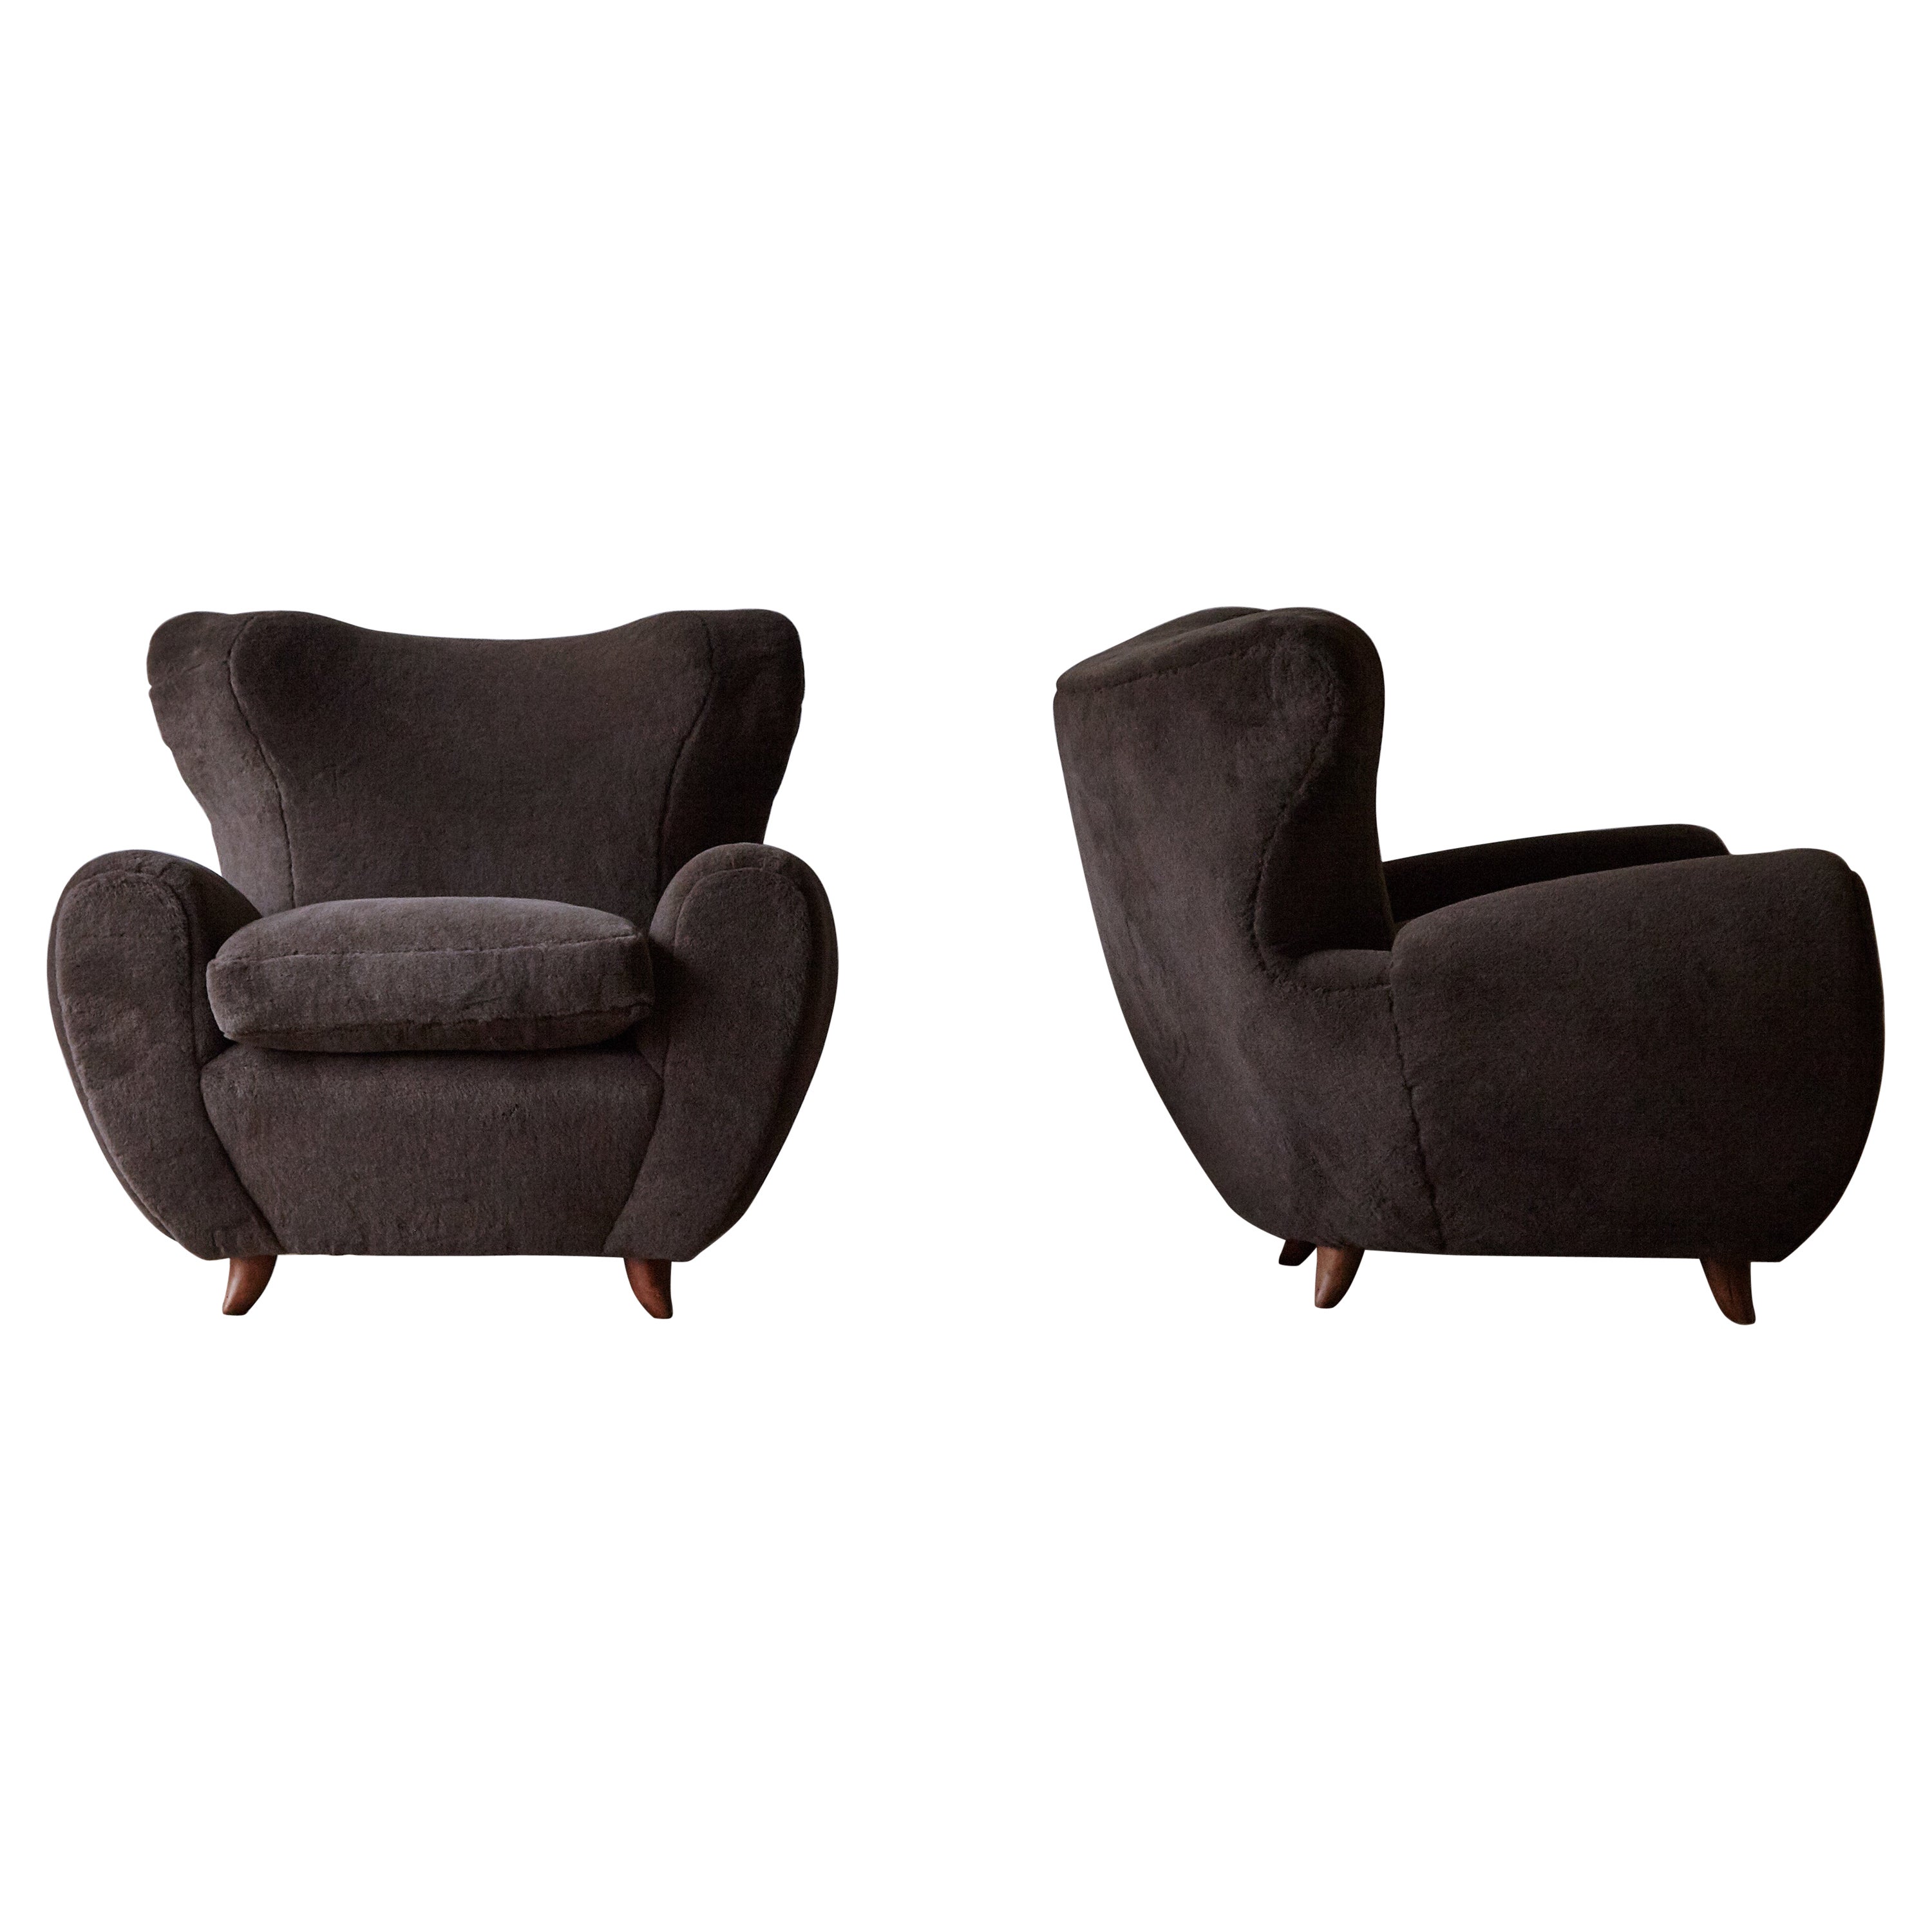 Exceptional Lounge Chairs, Upholstered in Alpaca, Italy, 1950s For Sale